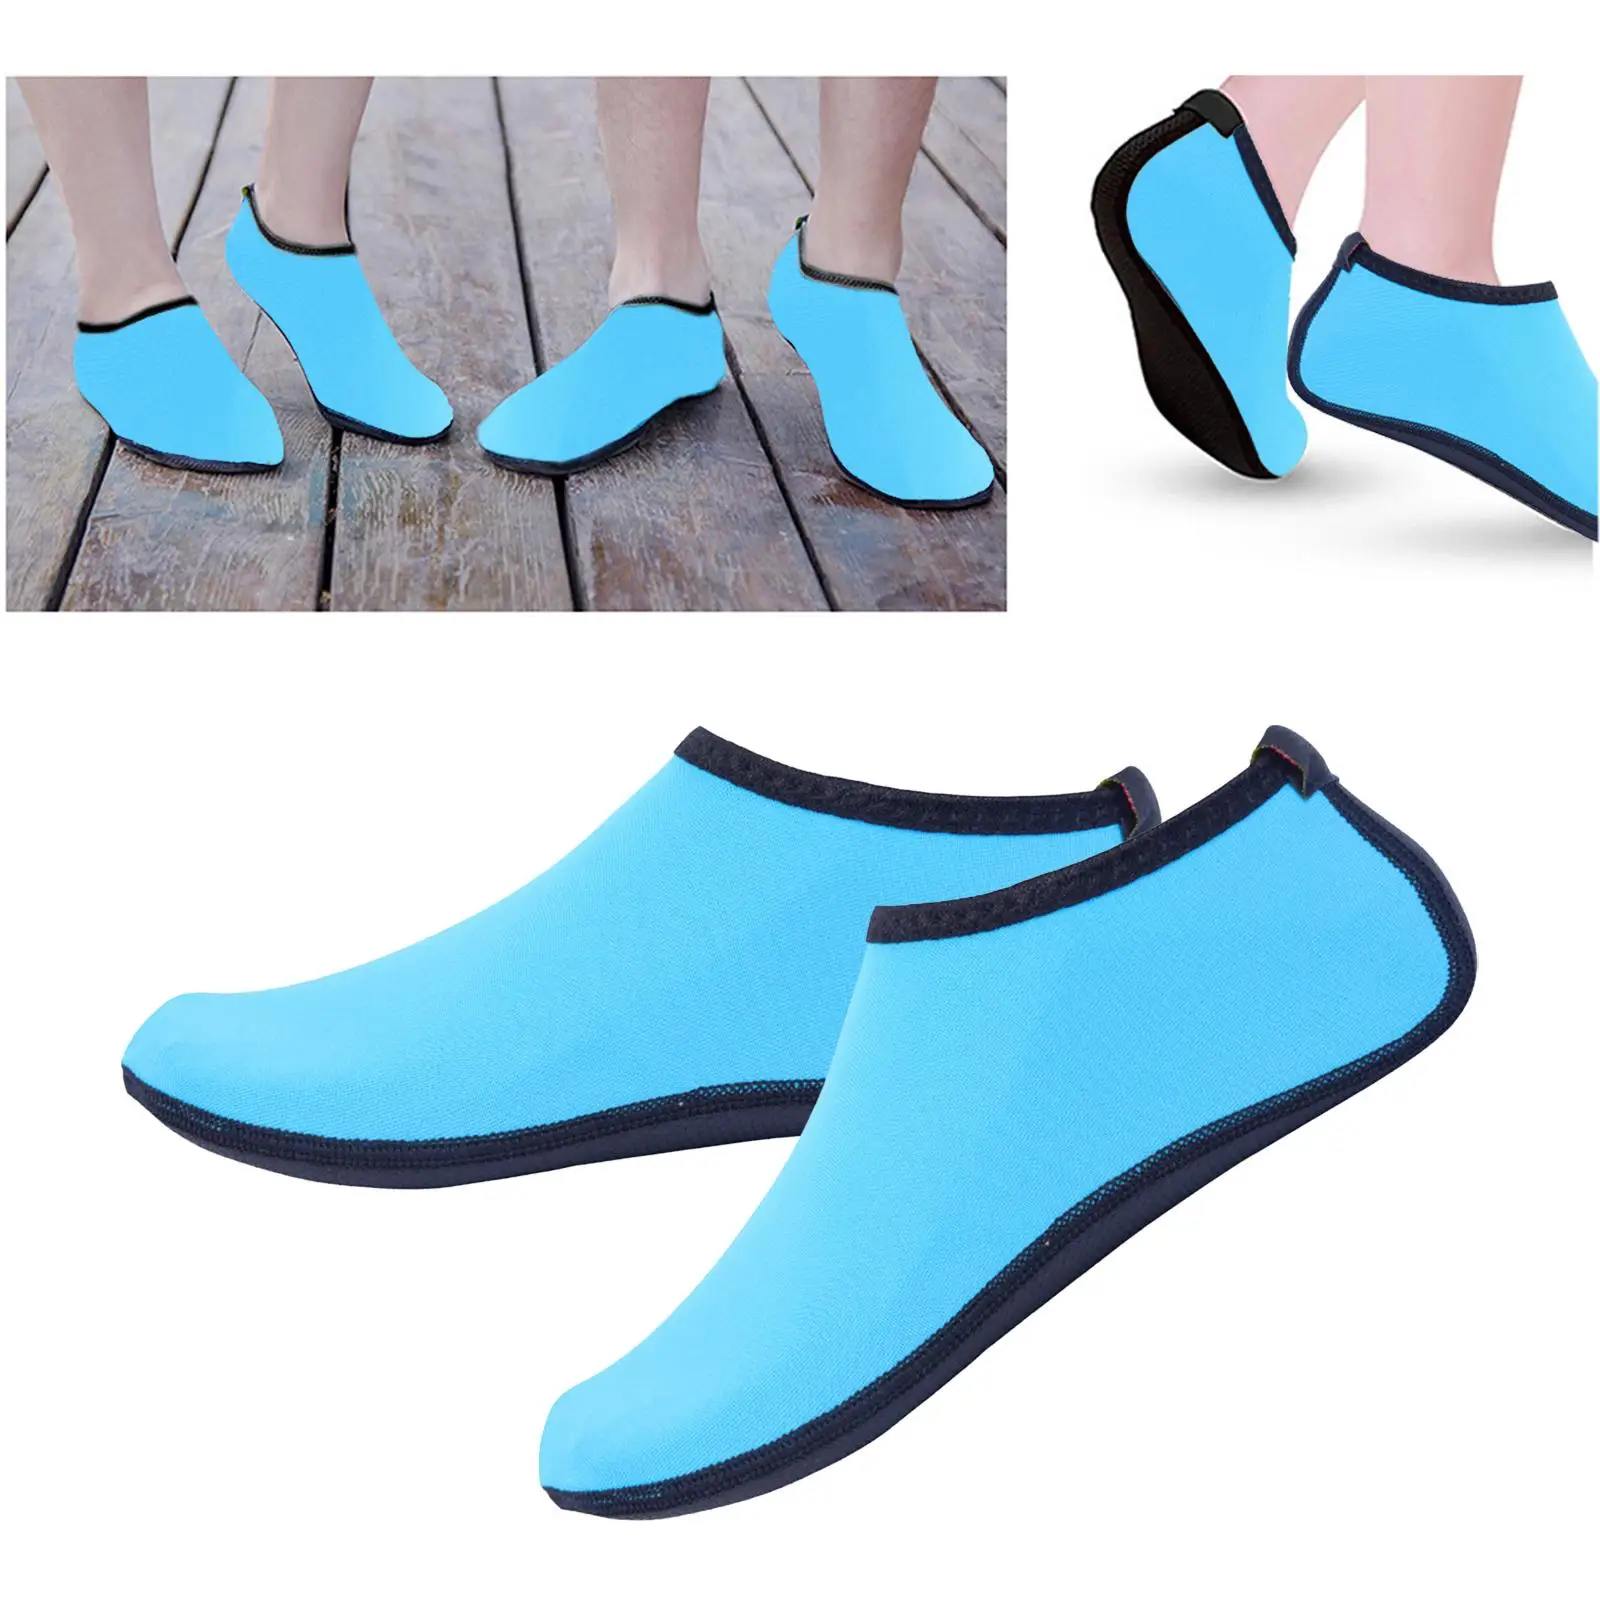 Dive Socks Swim Water Comfortable Breathable Sturdy Smooth Avoid Chafing